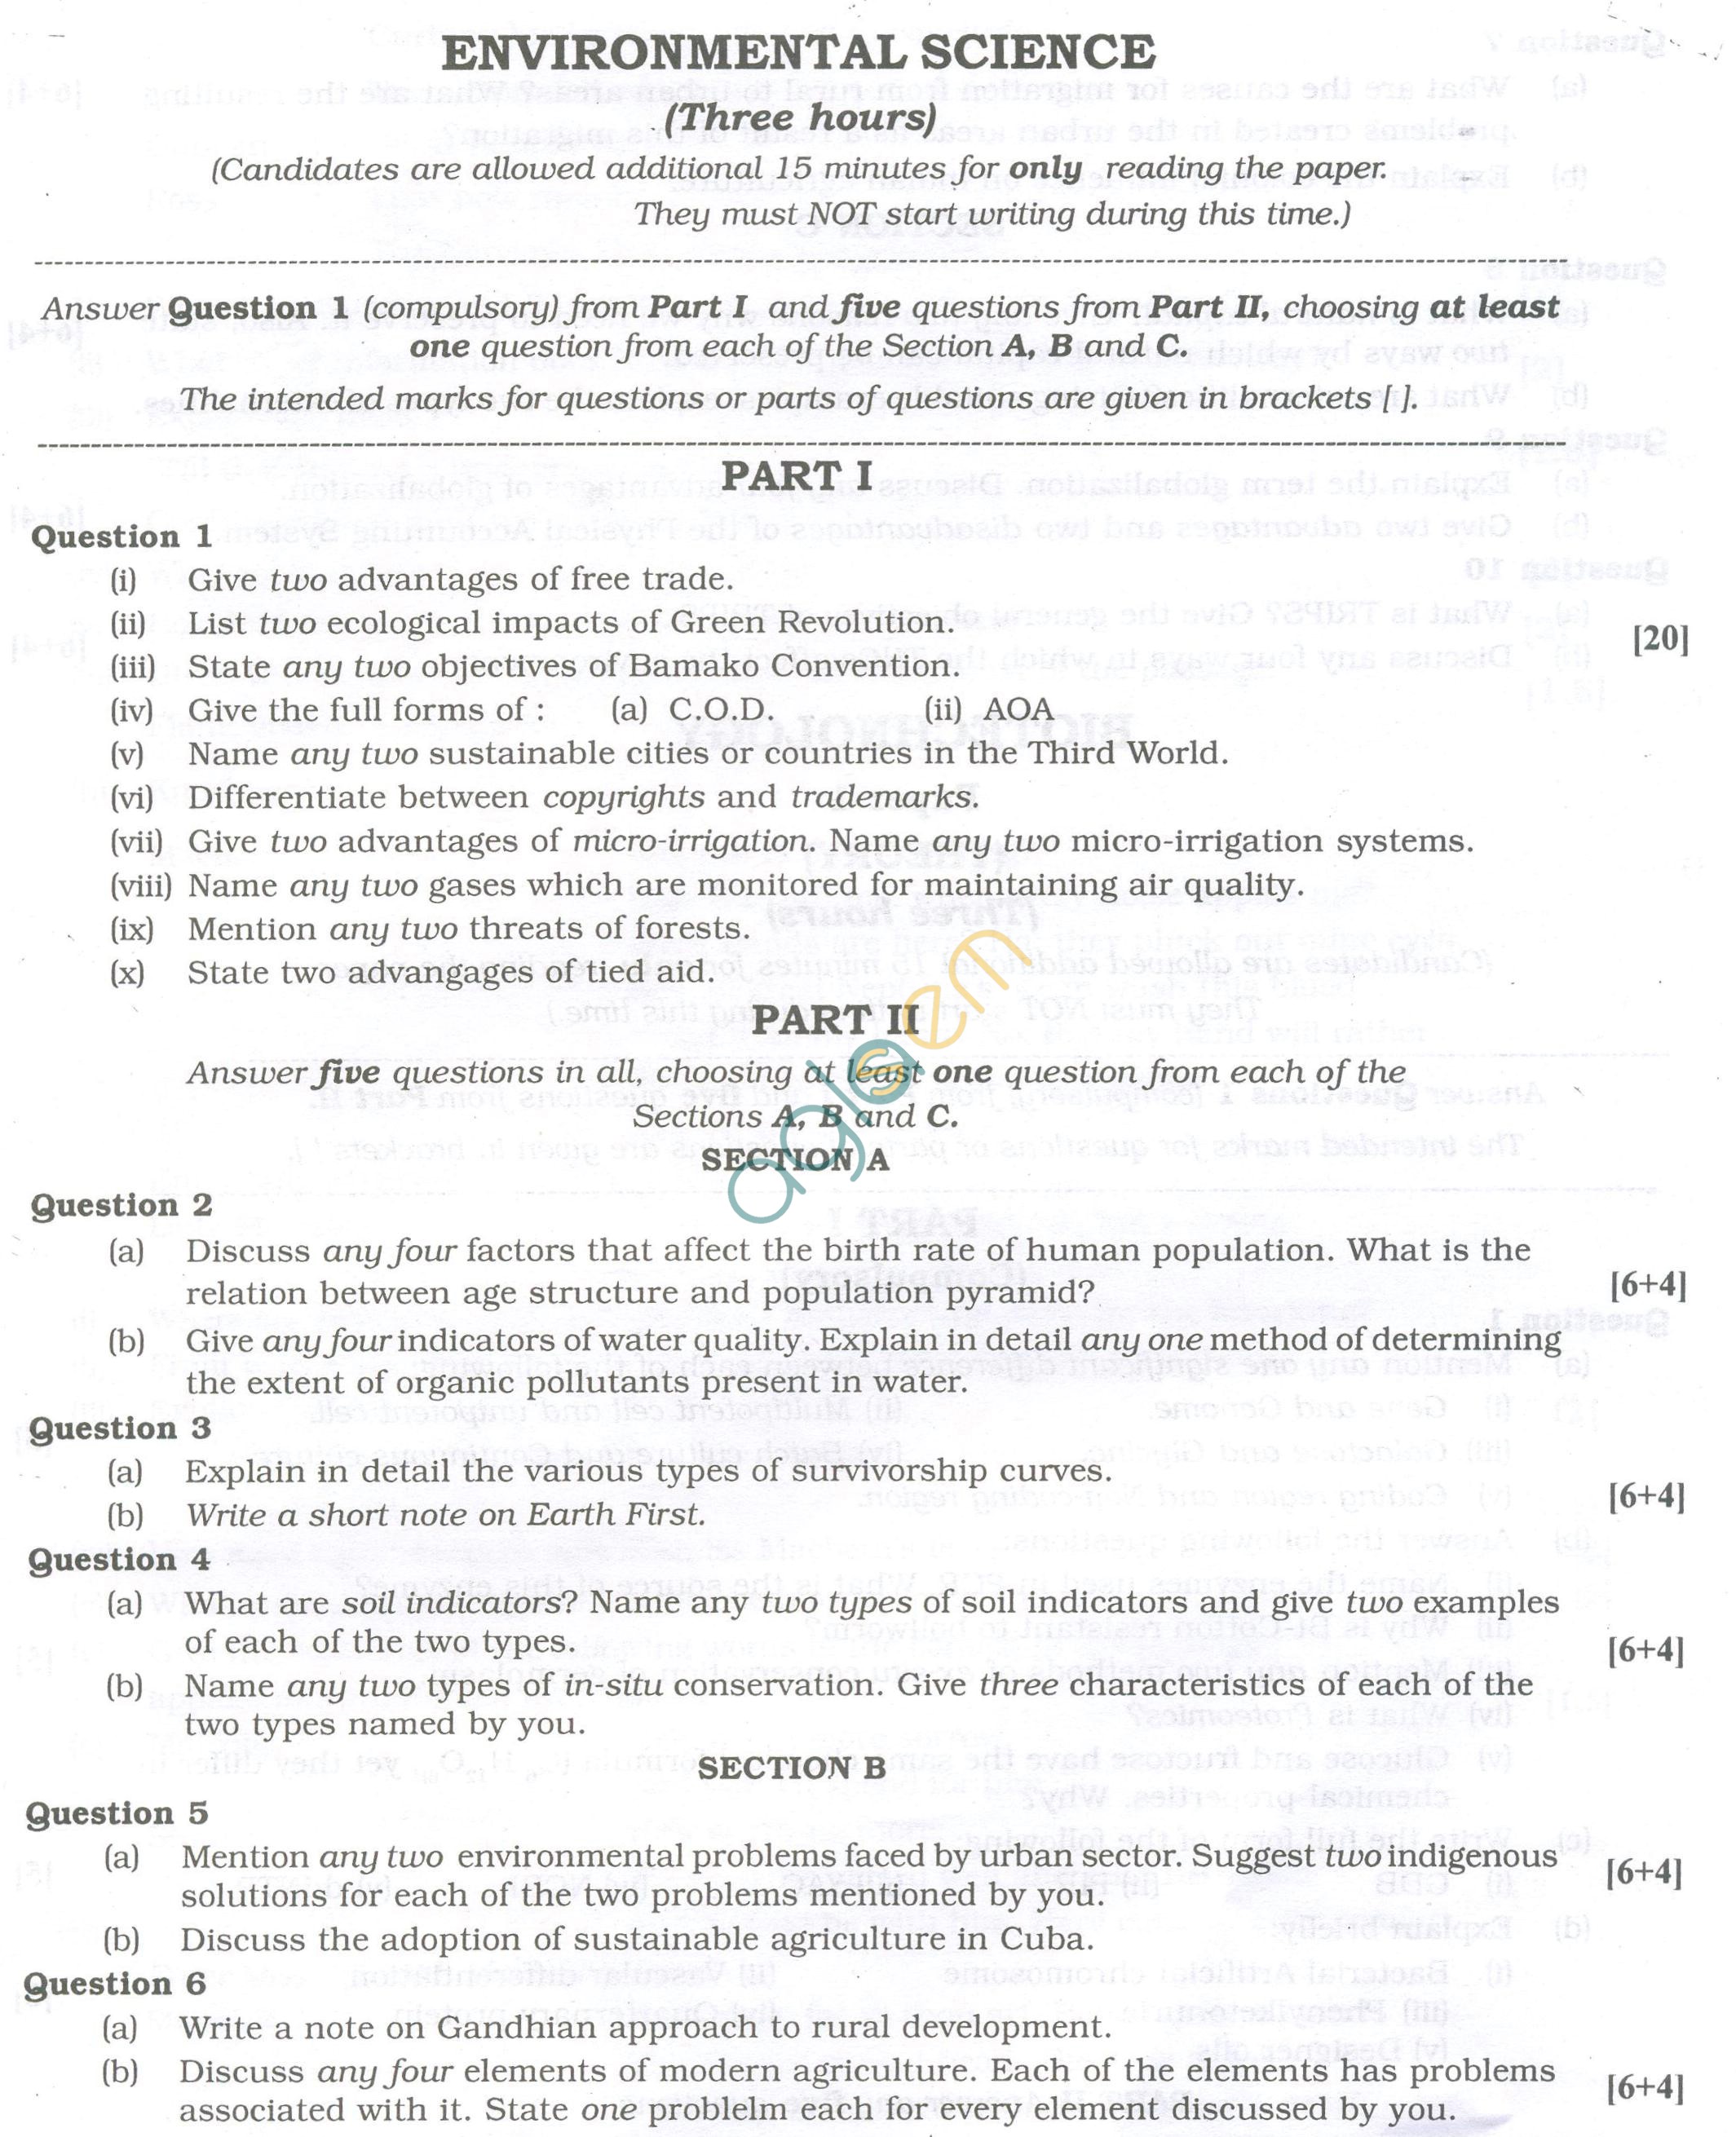 ISC Question Papers 2013 for Class 12 - Environmental Science